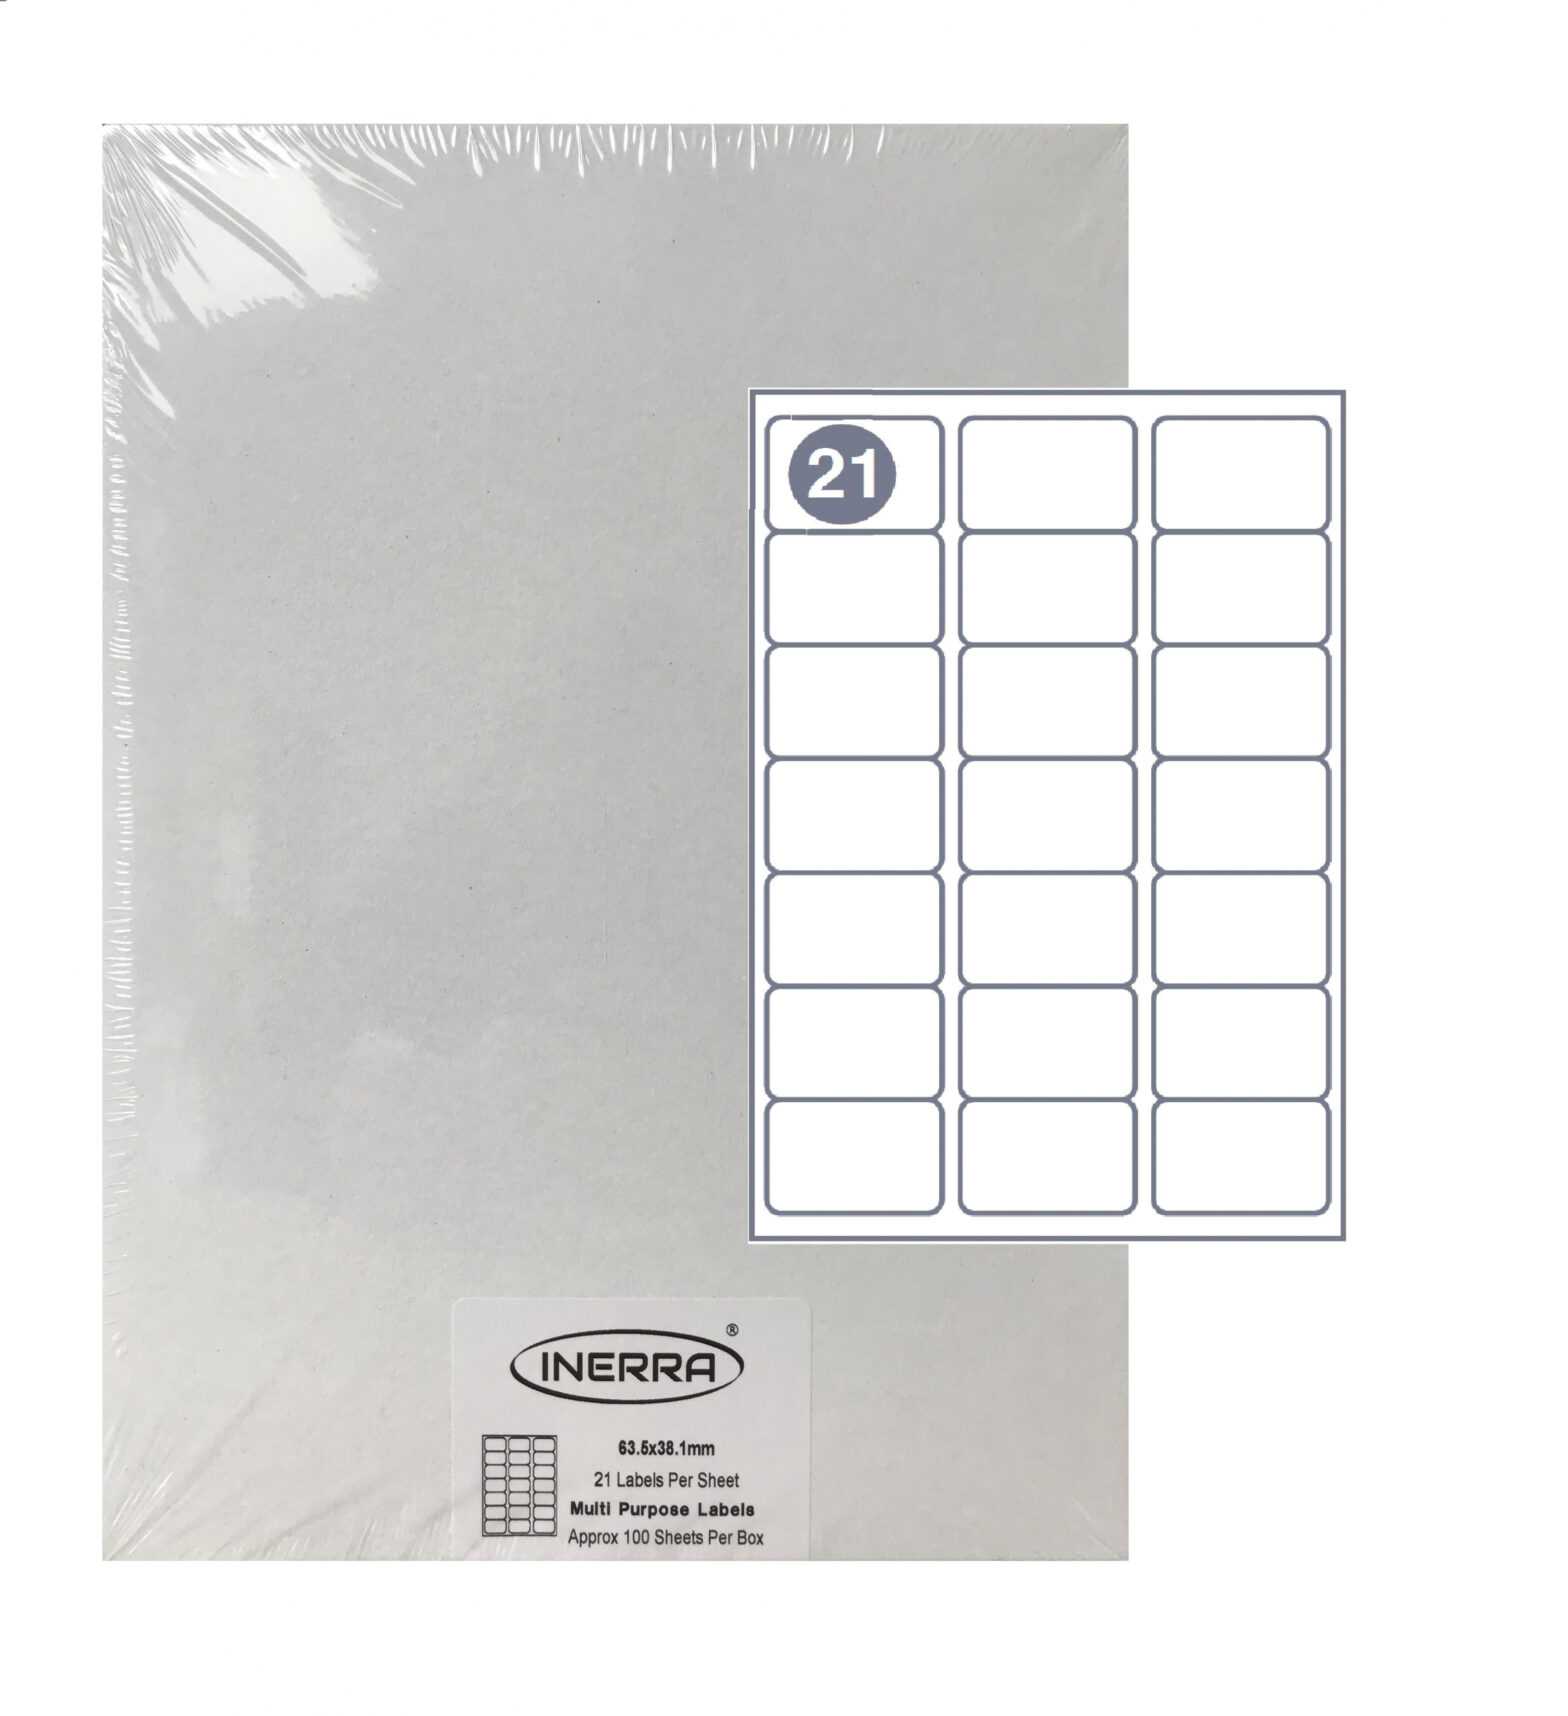 Free Template For Inerra Blank Labels - 21 Per Sheet throughout Label Template 21 Per Sheet